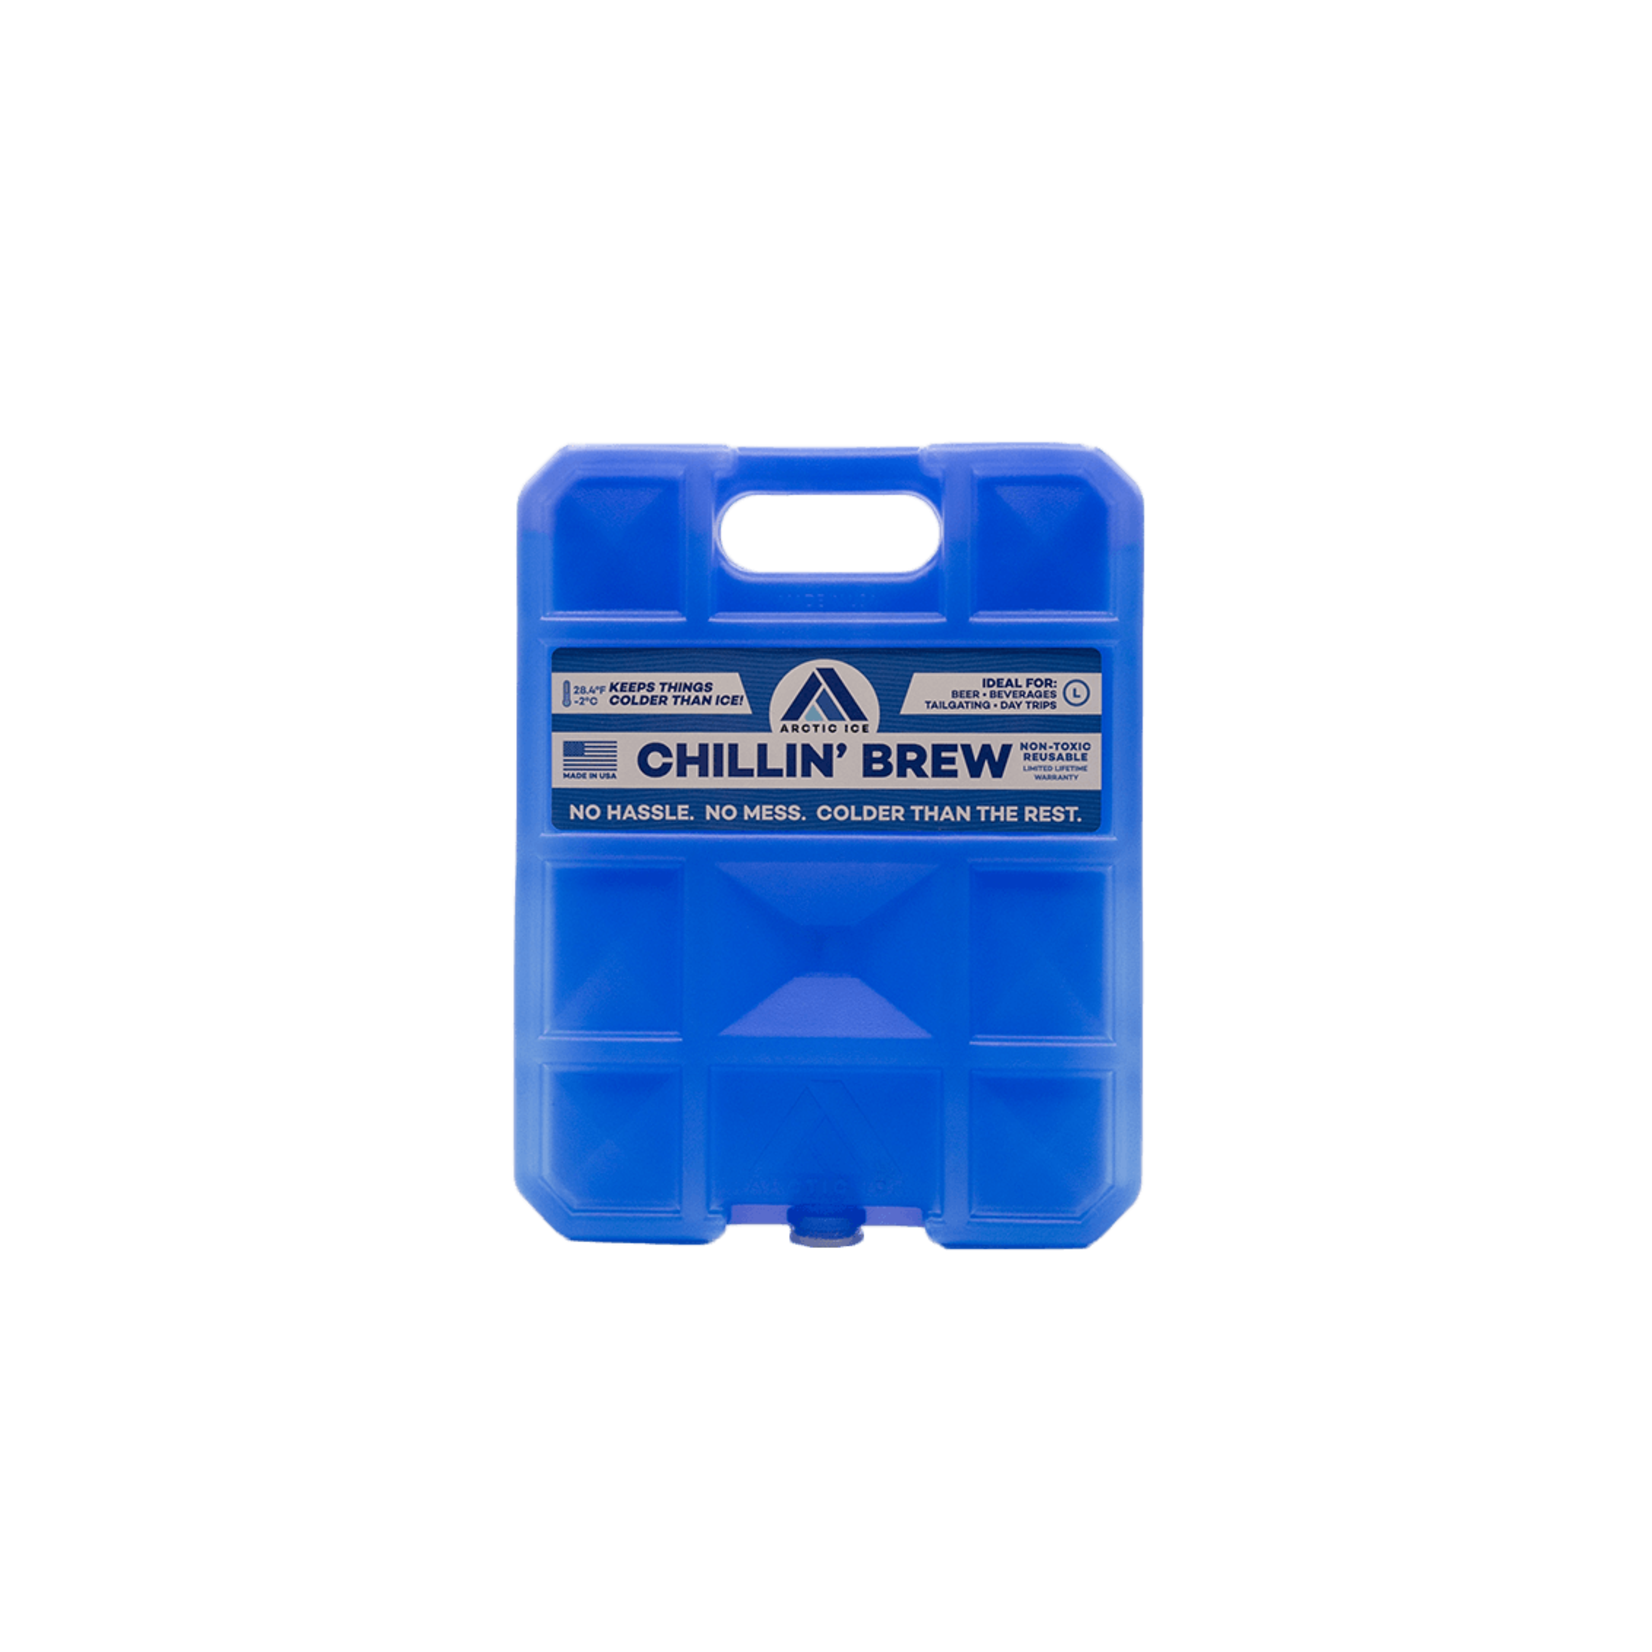 Canyon Coolers Chillin Brew Ice Pack